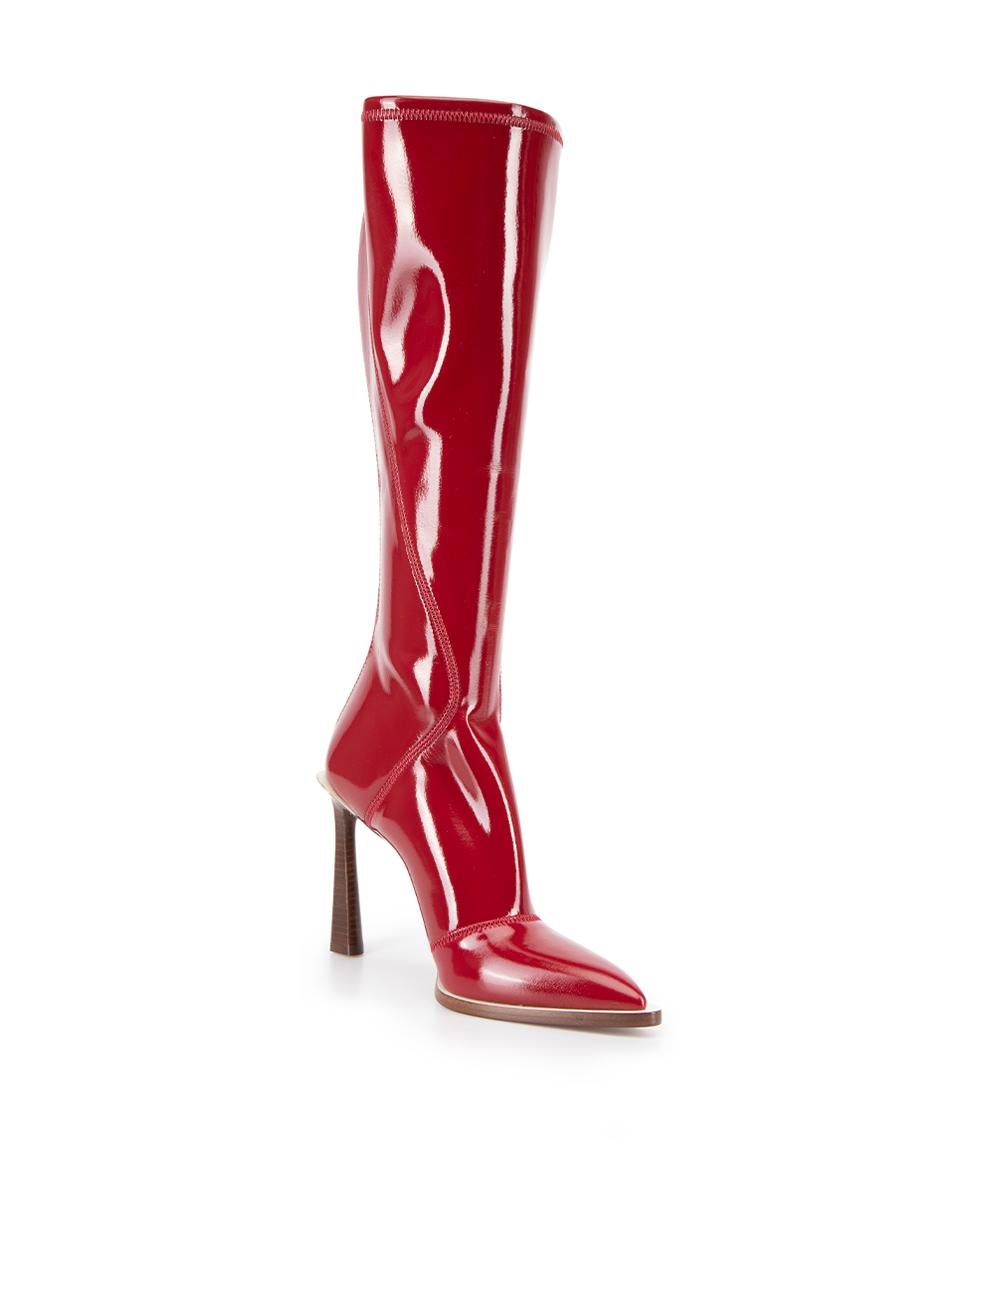 CONDITION is Very good. Hardly any visible wear to boots is evident. The boot do have some creasing and folding due to storage on this used Fendi designer resale item.



Details


Red

Patent leather

Knee high boots

Pointed toe

Accent